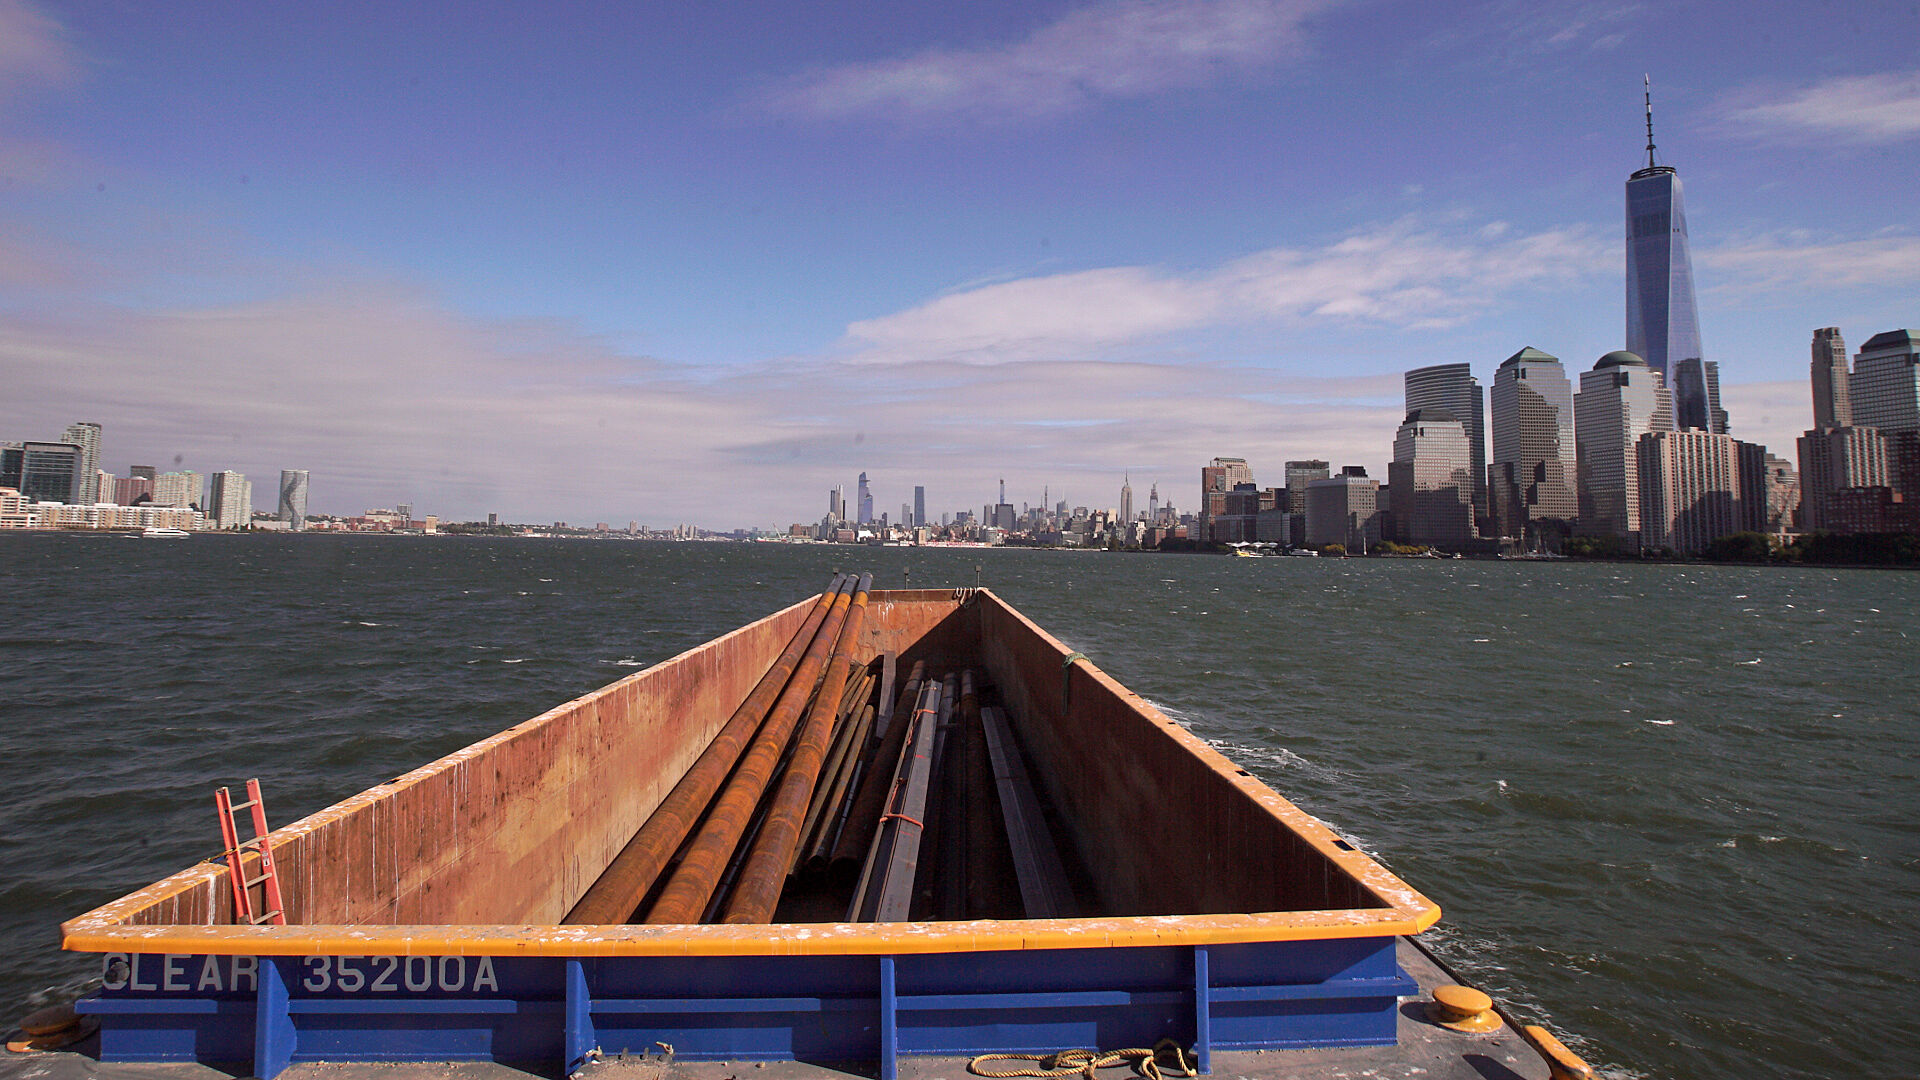 Photograph of a barge delivering materials on the Hudson River